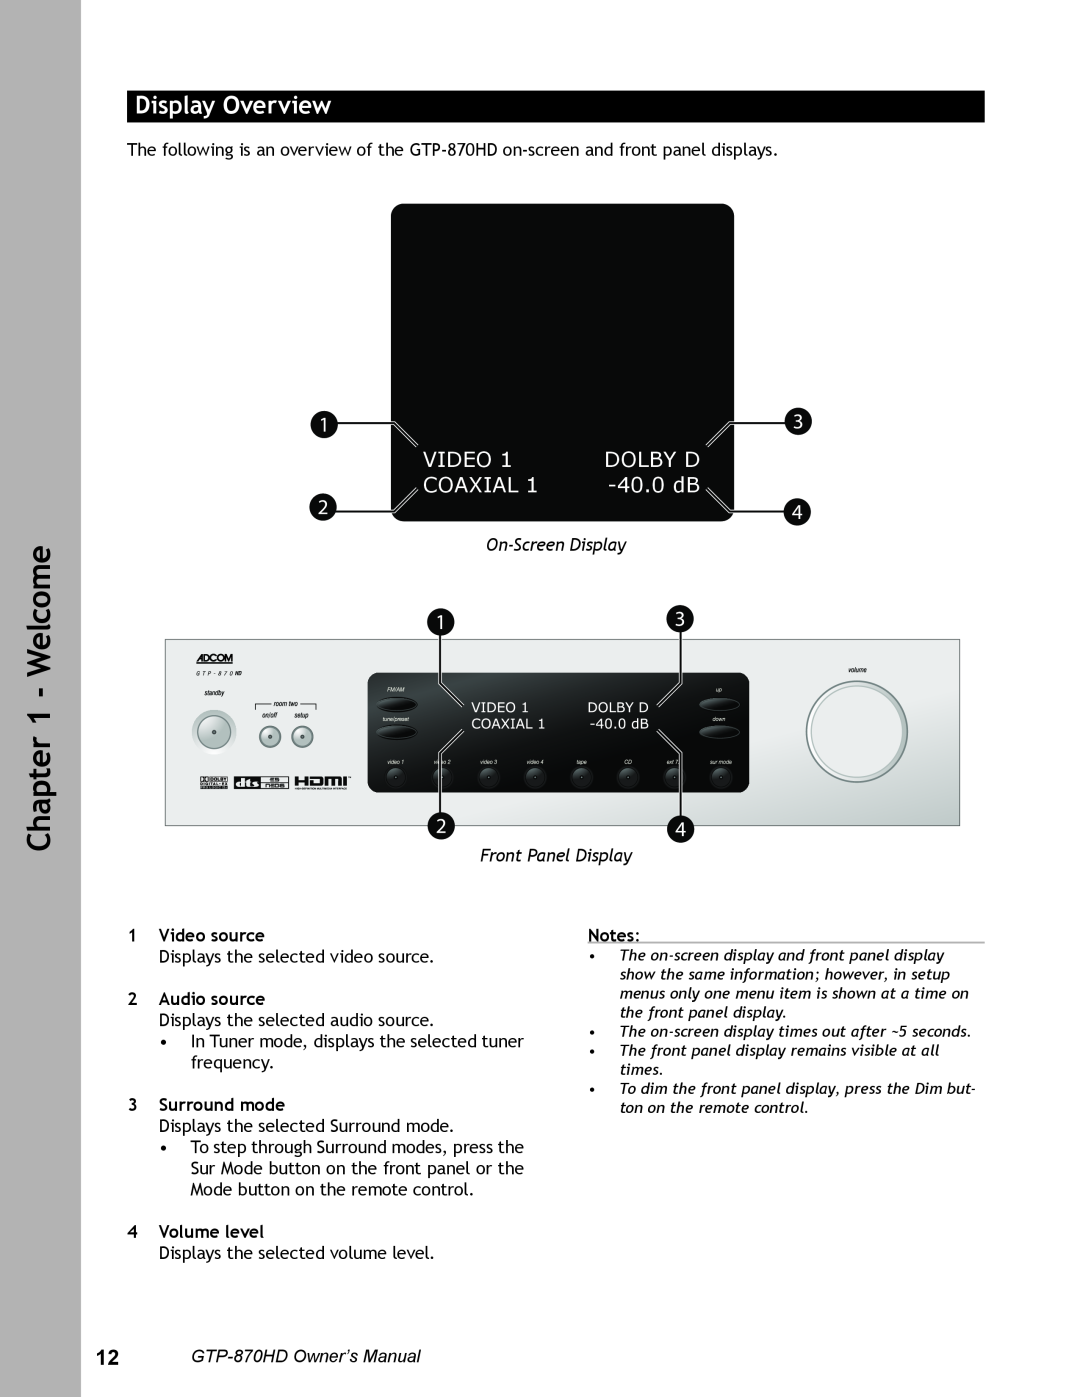 Adcom GTP-870HD Display Overview, On-ScreenDisplay Front Panel Display, 1Video source, 2Audio source, 3Surround mode 